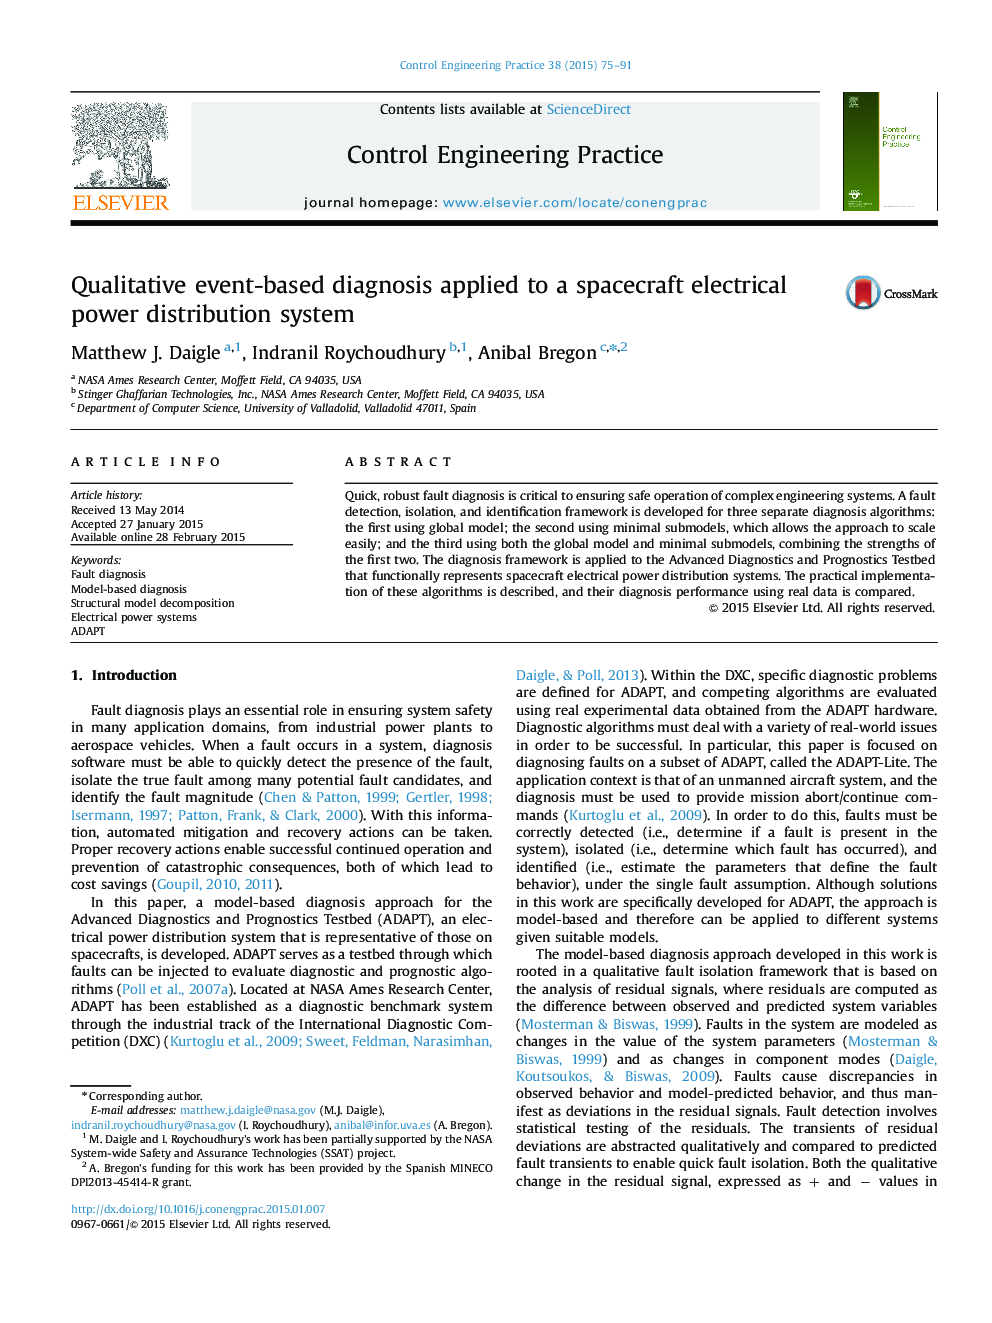 Qualitative event-based diagnosis applied to a spacecraft electrical power distribution system